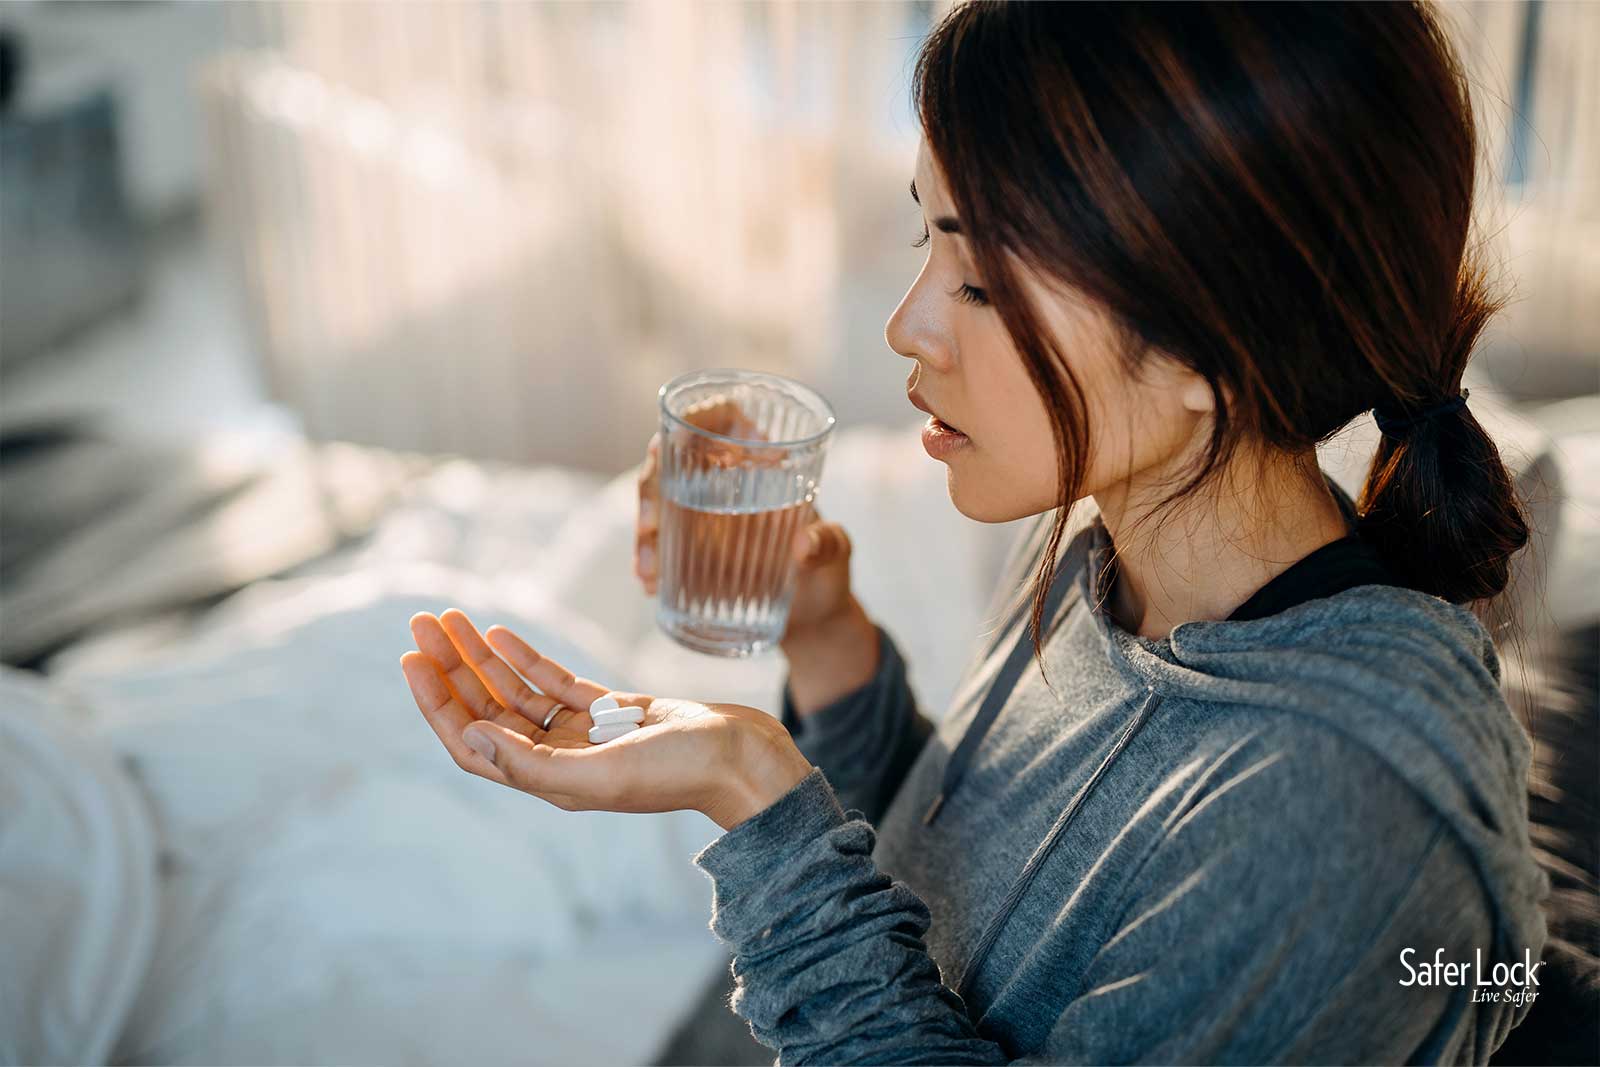 A young Latina woman with a glass of water and prescription pills. Learn how to use opioids safely at rxguardian.com.